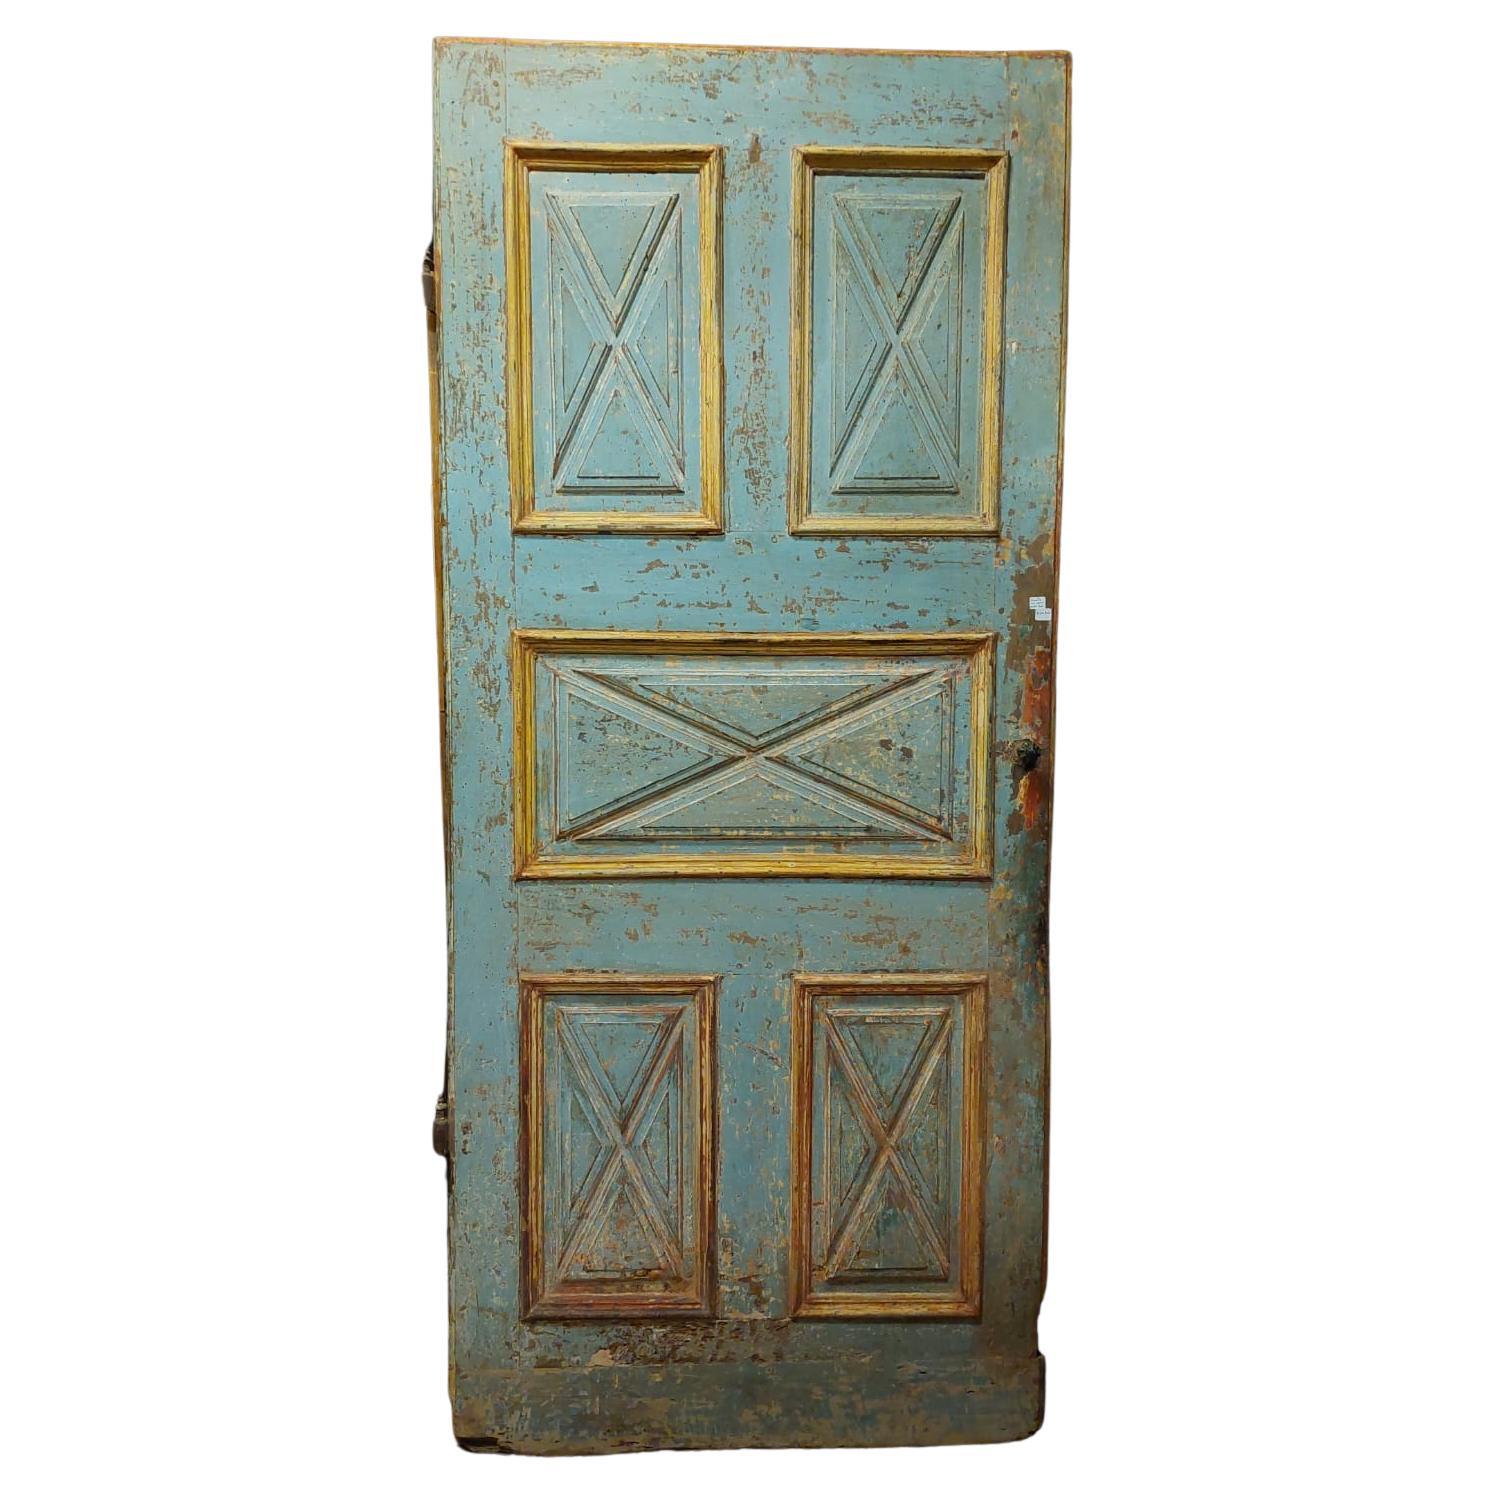 Antique Door, Carved and Lacquered on Walnut Wood, 18th Century Italy